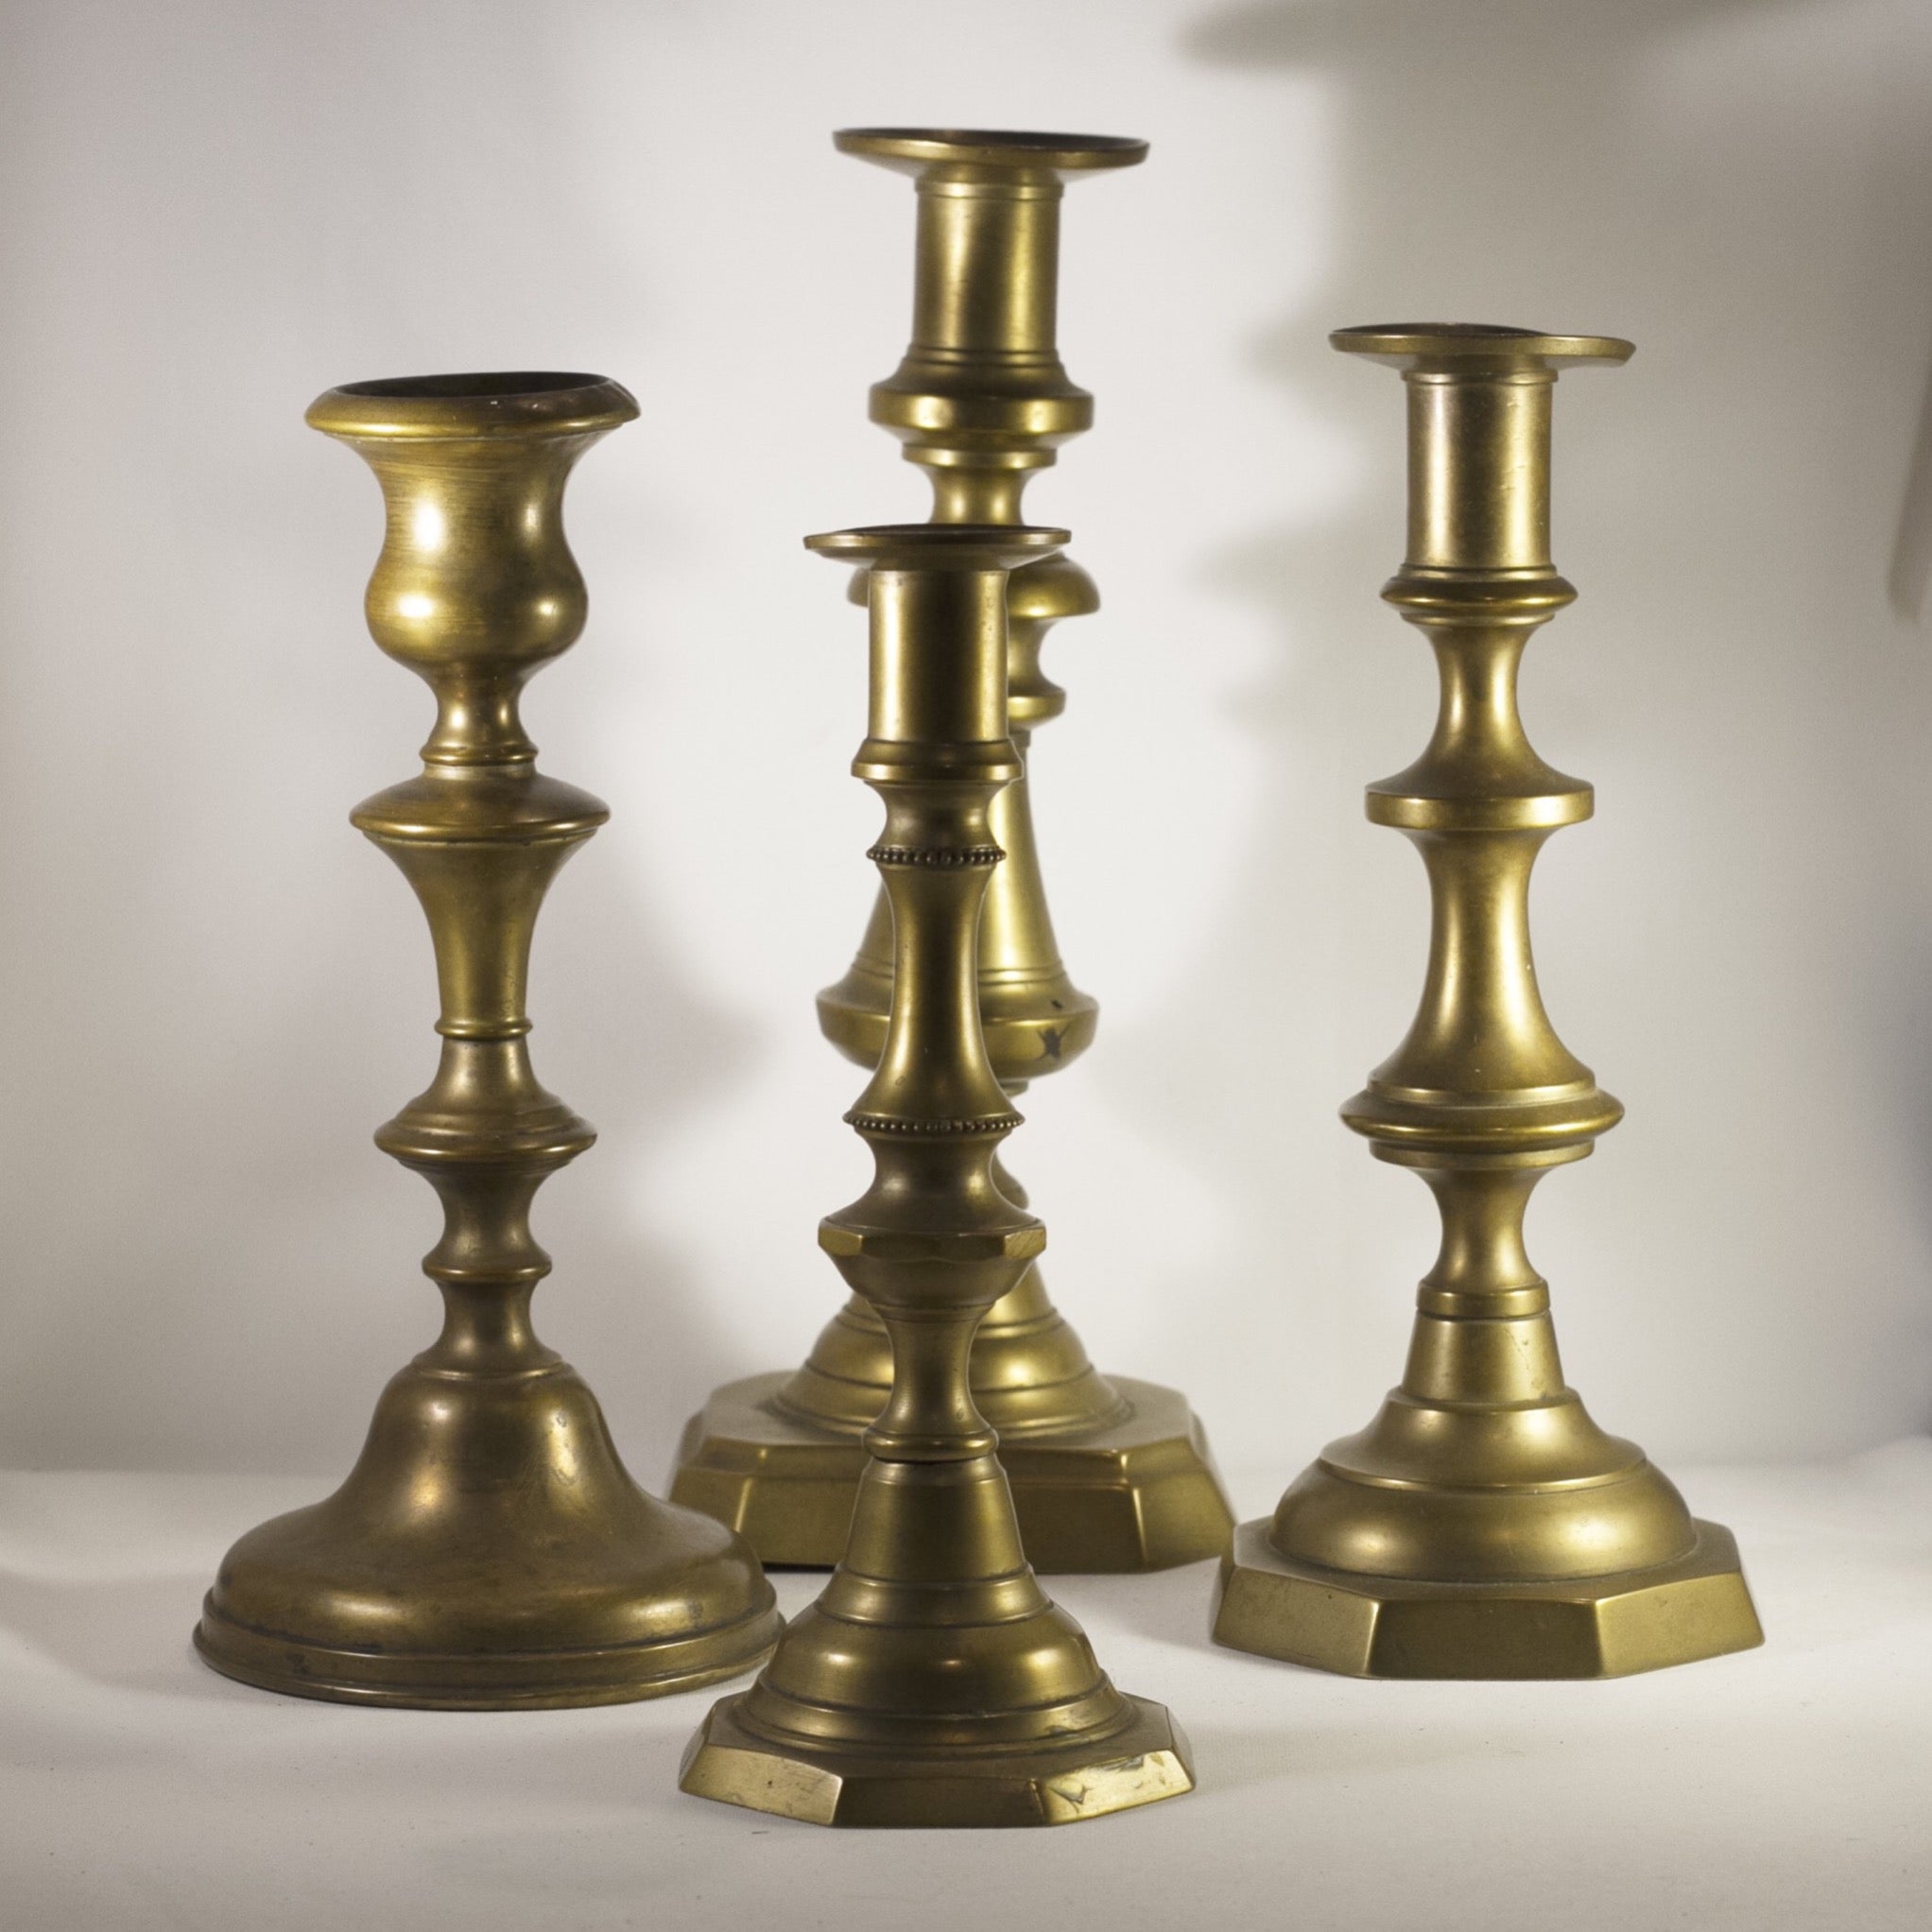 Four Antique English Victorian BRASS CANDLESTICKS Late 19th